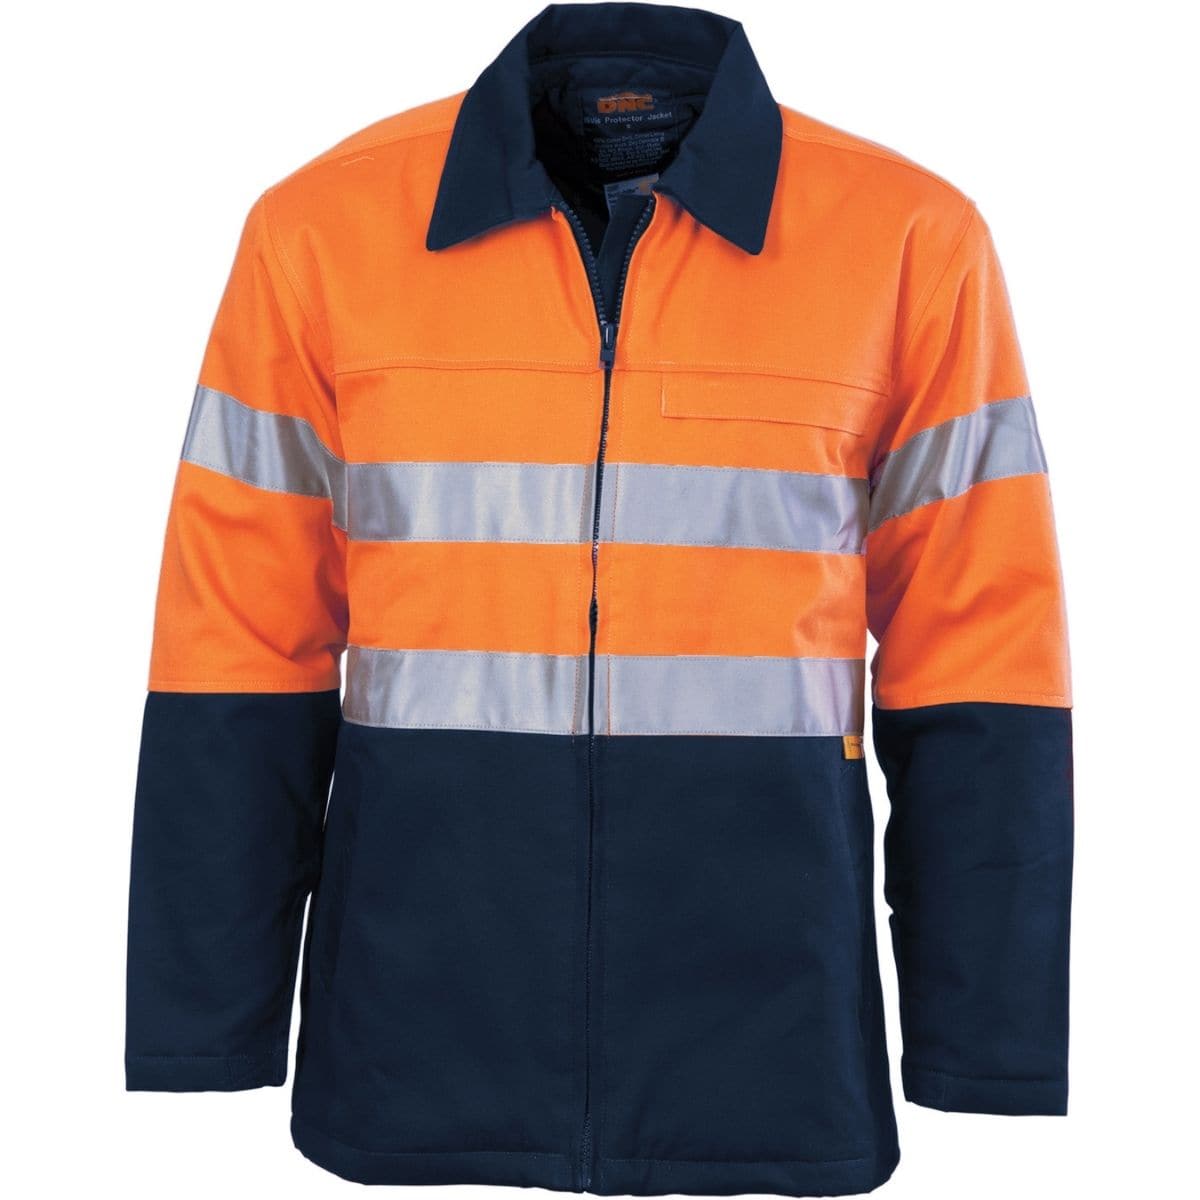 DNC HiVis Two Tone Protect or Drill Jacket With 3M Reflective Tape 3858